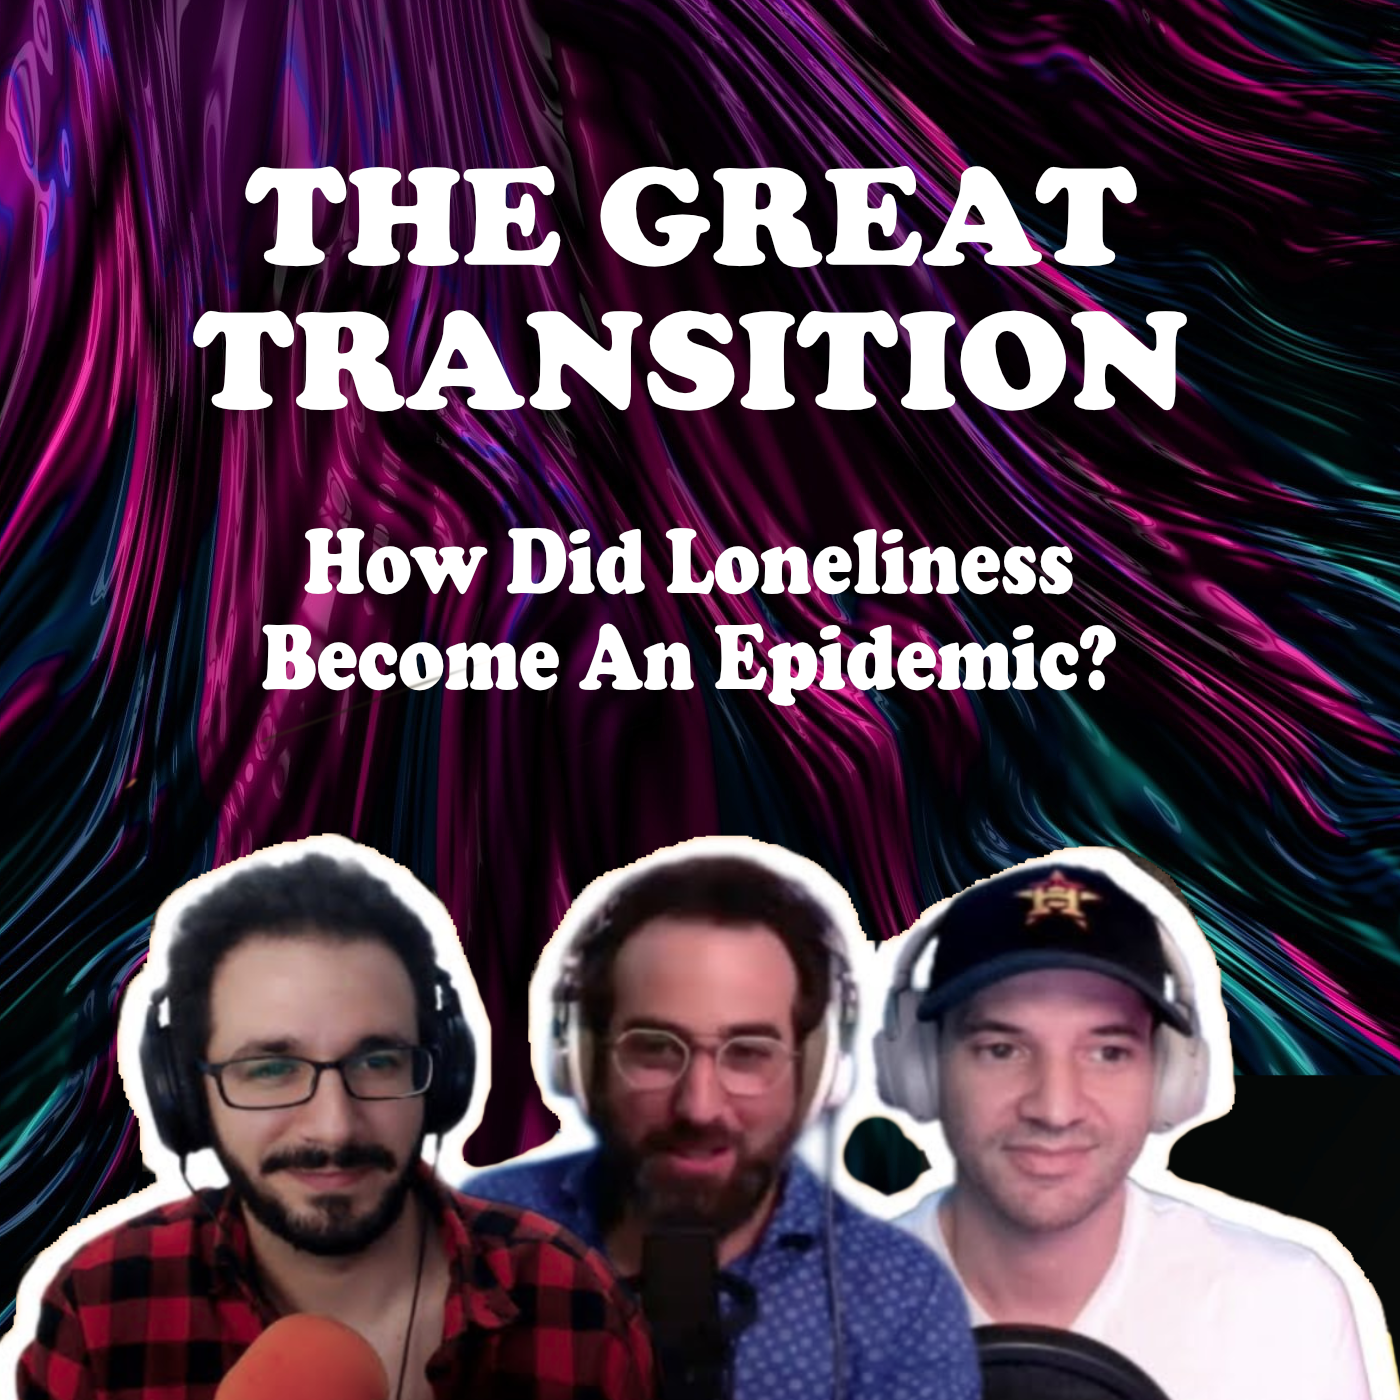 The Great Transition - How Did Loneliness Become An Epidemic?